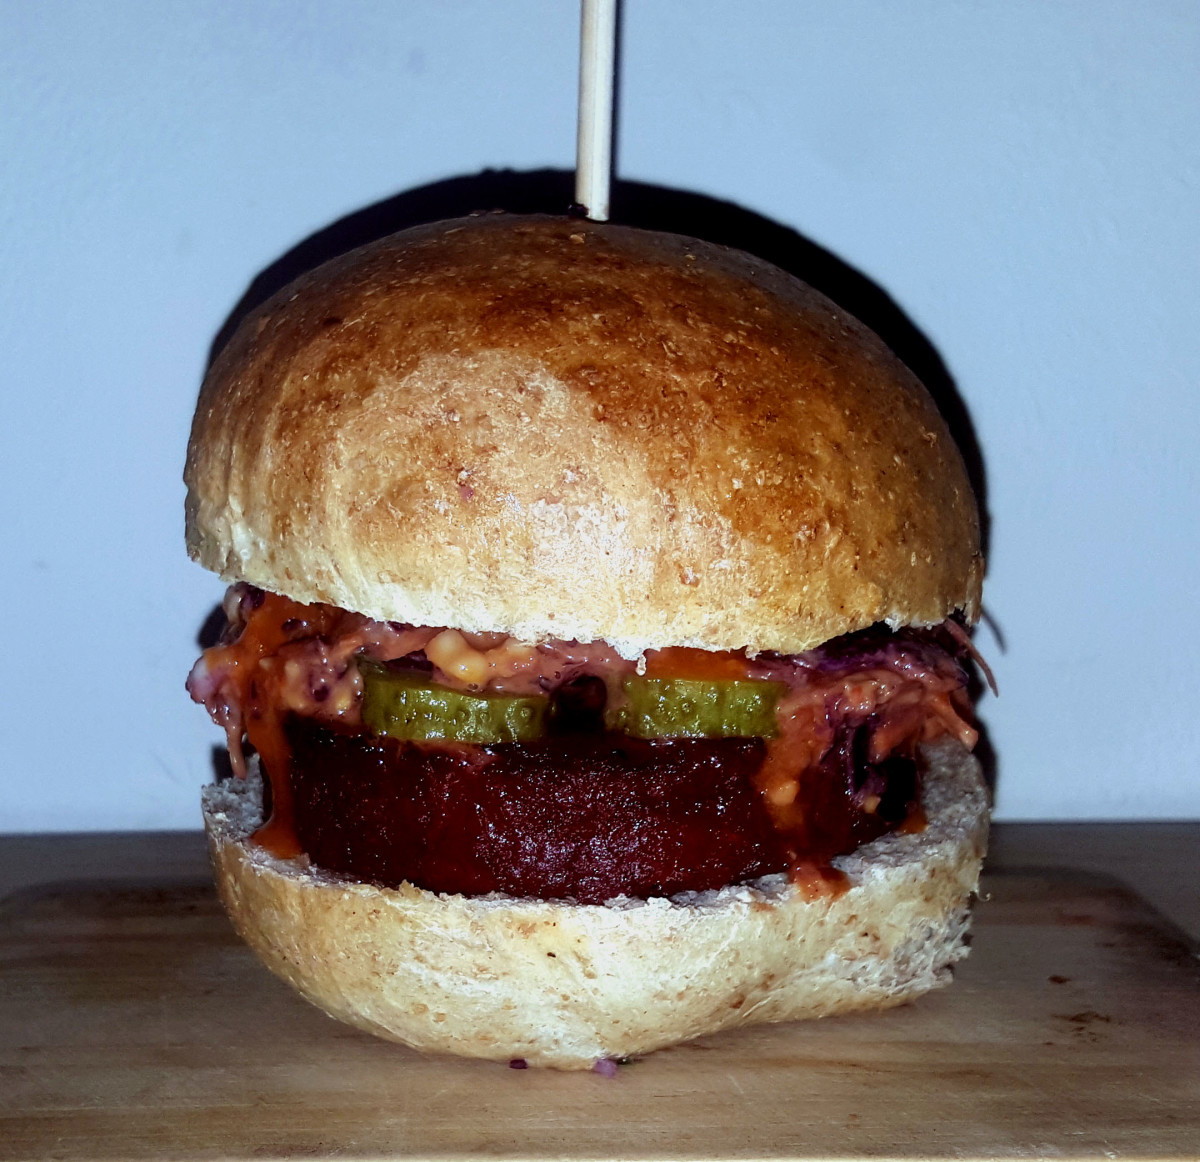 Vegan burger with gherkins  and relish in a home-baked bread roll